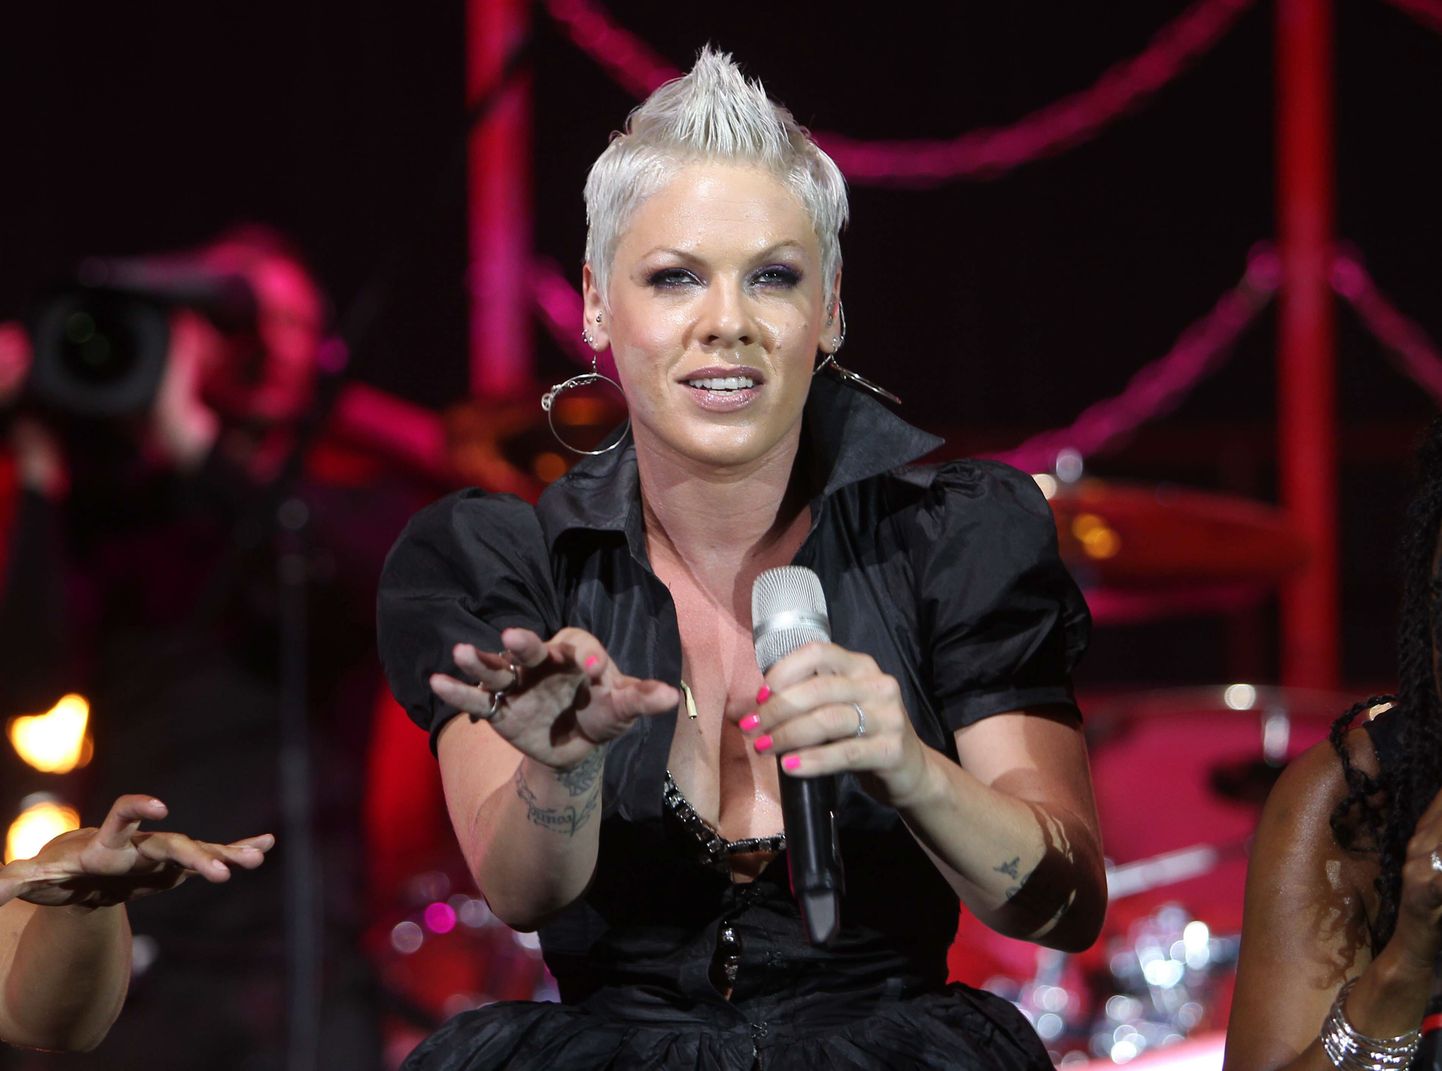 US singer Pink performs on stage on July 13, 2010 in Nice, southeastern France.  AFP PHOTO VALERY HACHE